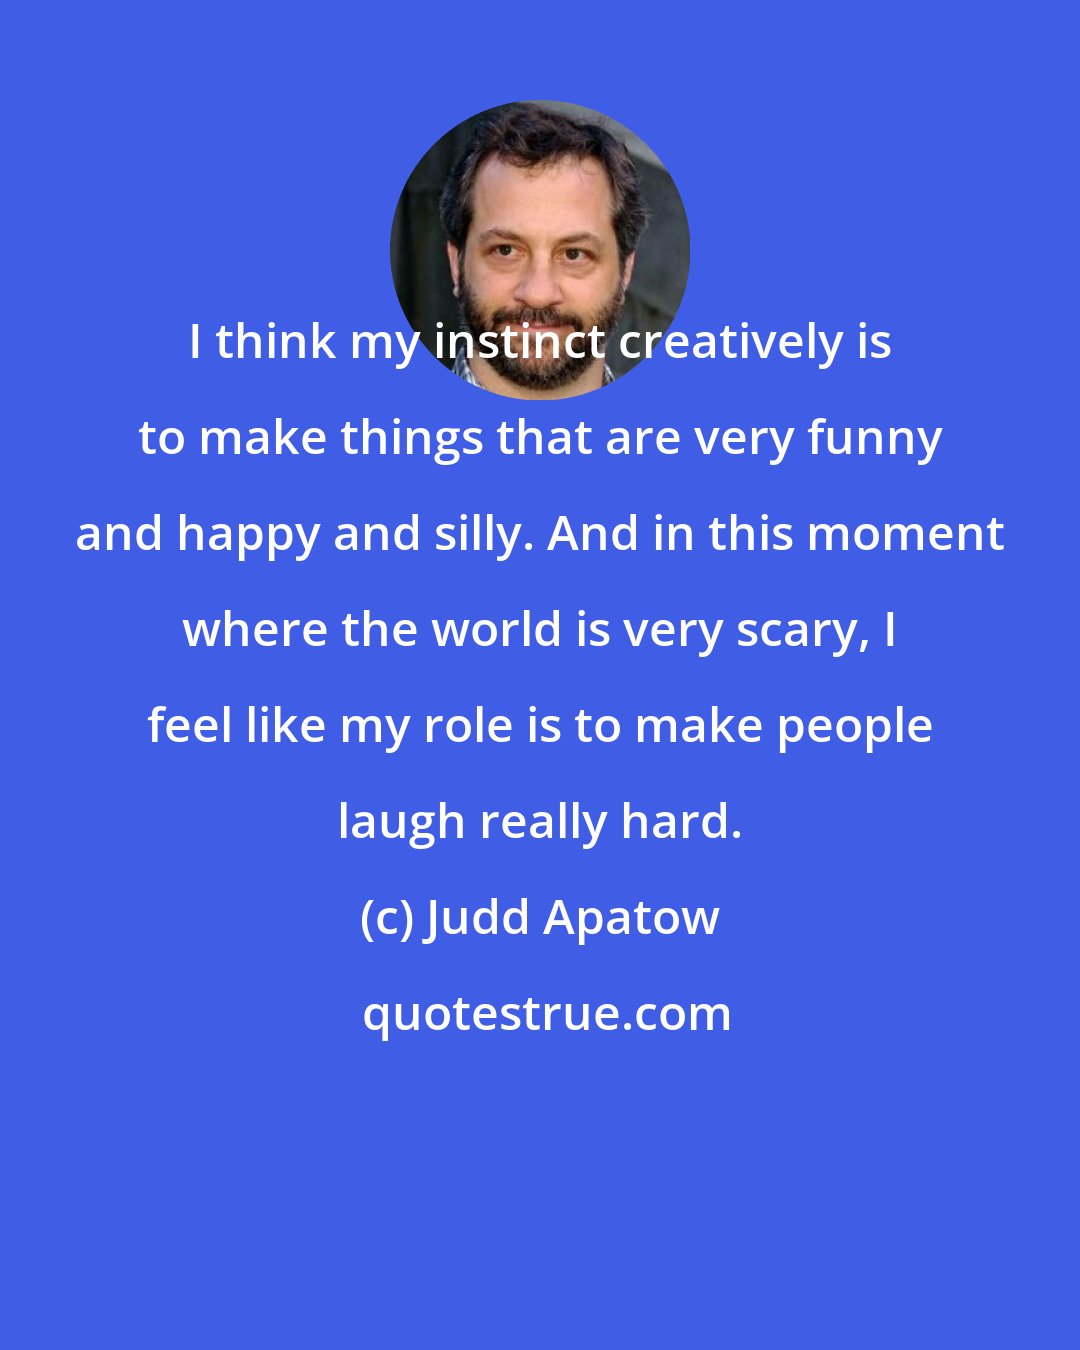 Judd Apatow: I think my instinct creatively is to make things that are very funny and happy and silly. And in this moment where the world is very scary, I feel like my role is to make people laugh really hard.